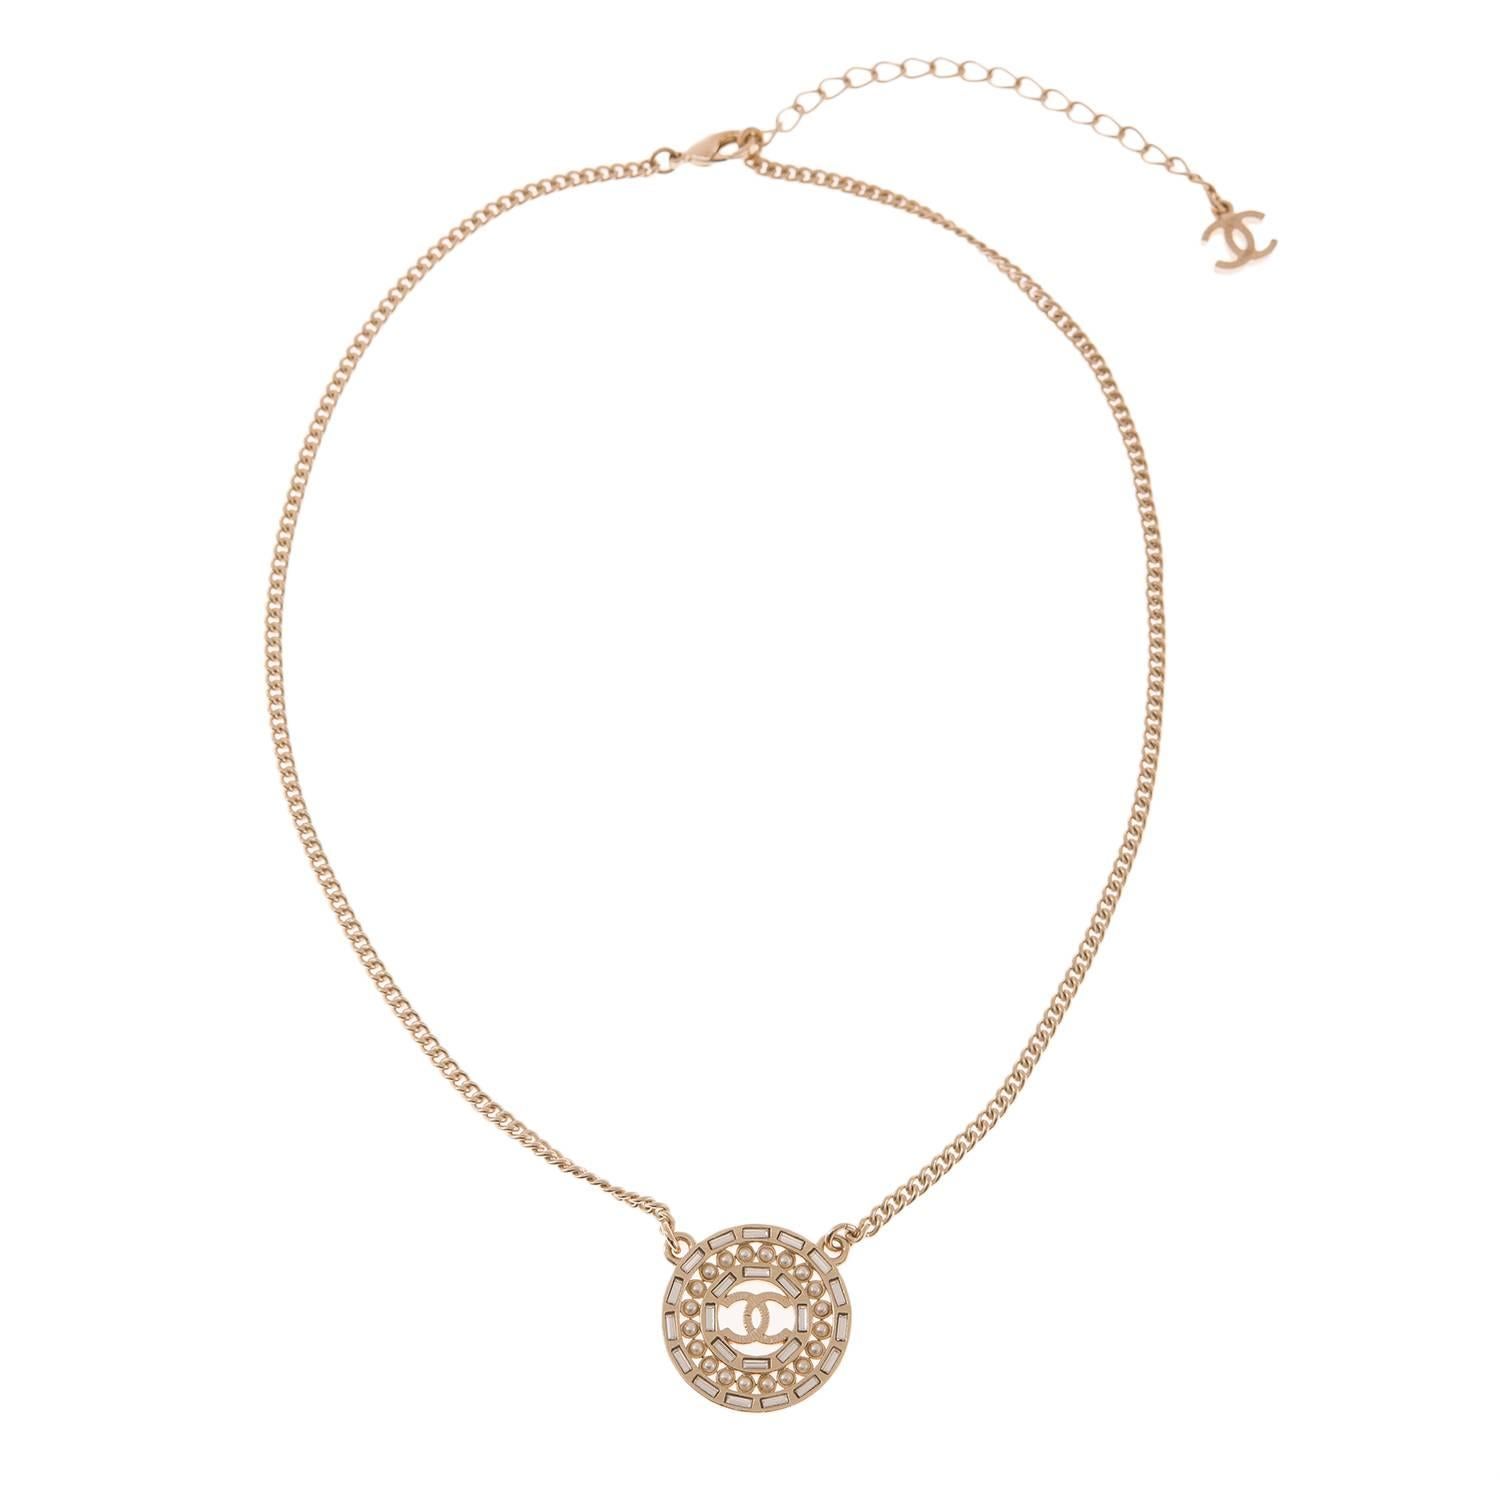 Chanel matte gold tone metal necklace with faux pearls and crystal accents.

This limited edition necklace has a one-inch round matte gold tone pendant with a layer of embedded faux pearls surrounded by layers of embedded crystals and Florentine